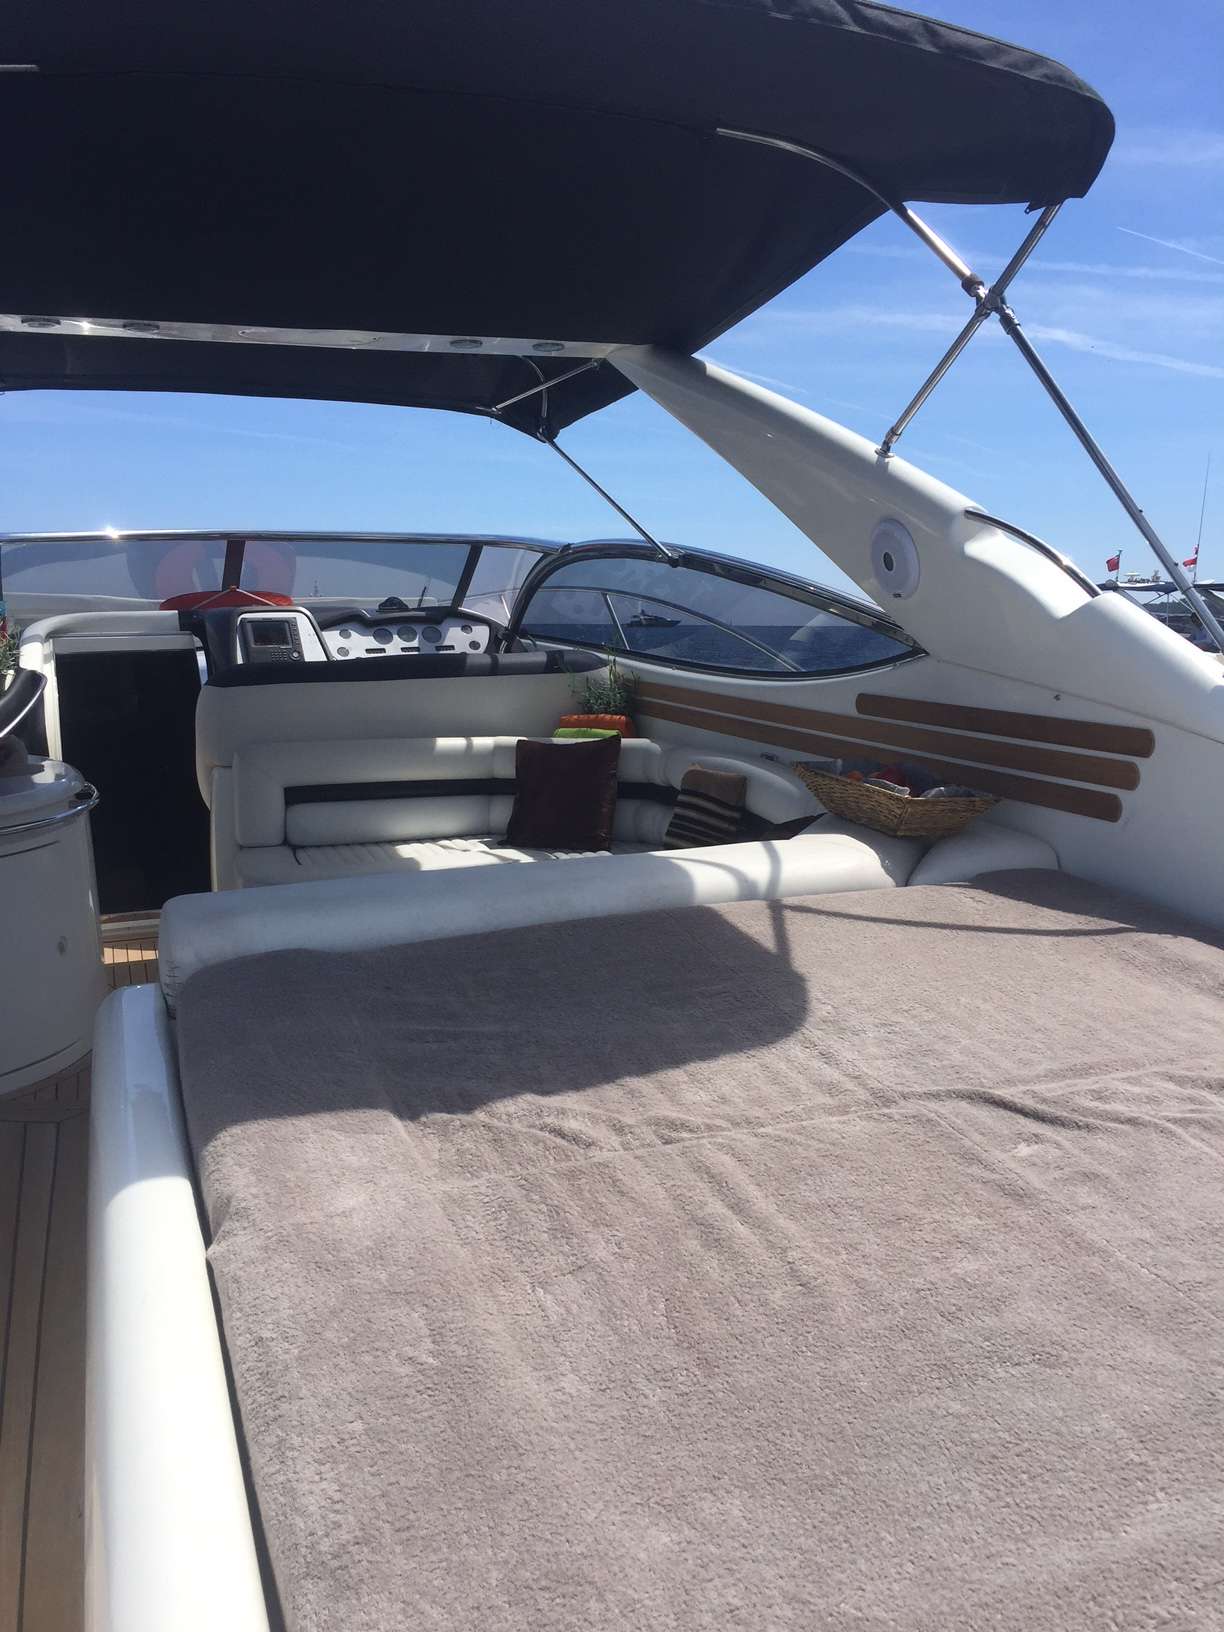 Sunseeker 48 - Yacht Charter Cannes & Boat hire in France French Riviera Cannes Vieux port de Vallauris 3